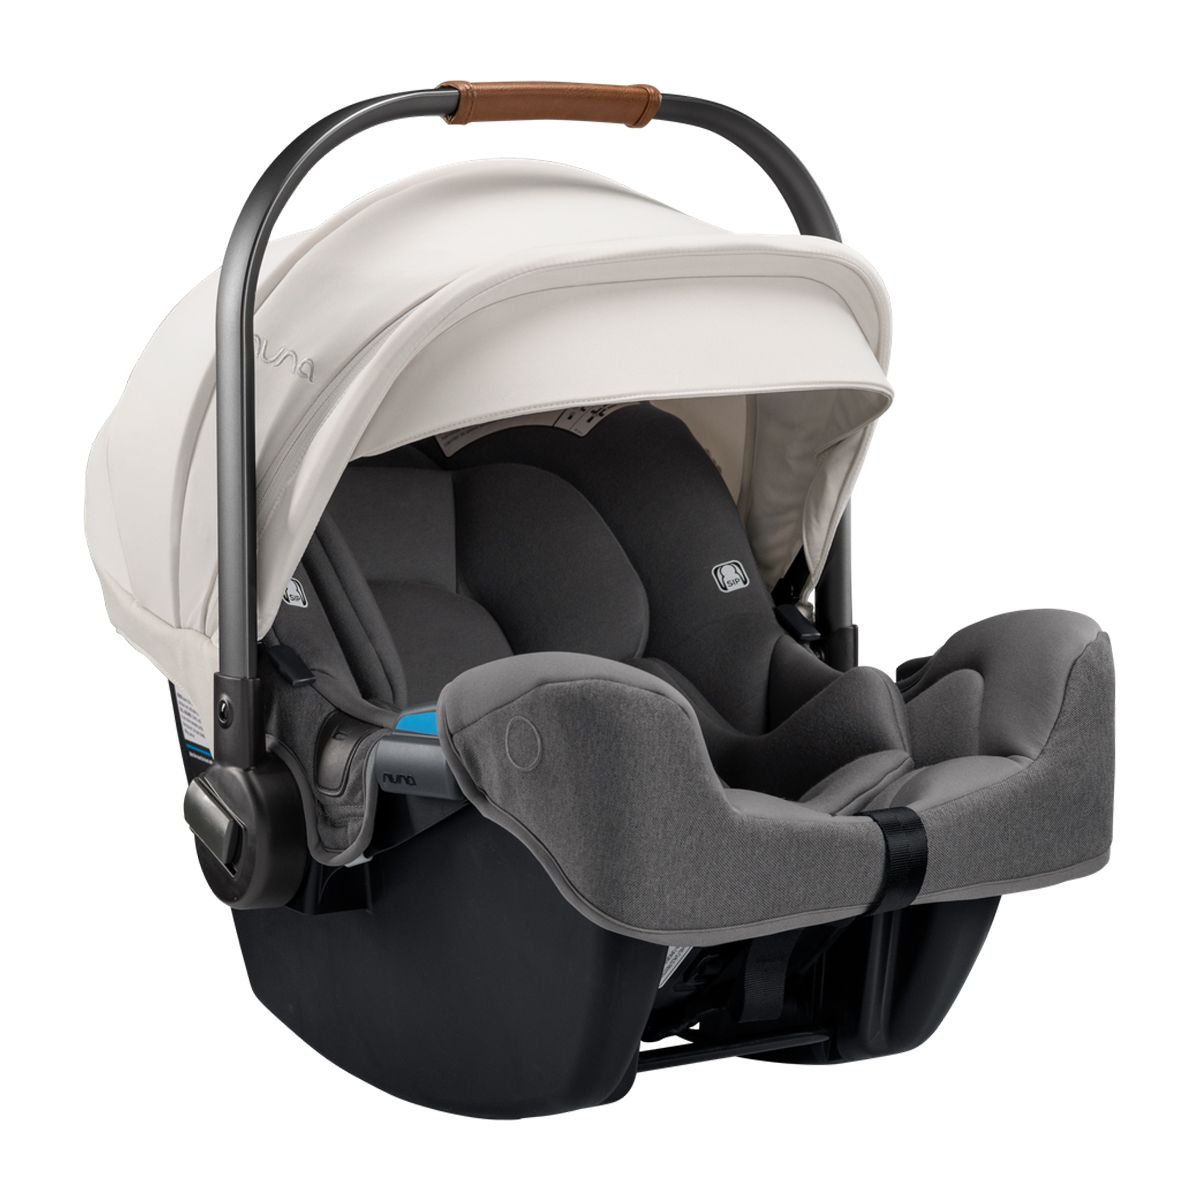 Nuna PIPA RX Infant Car Seat and Base | The Tot